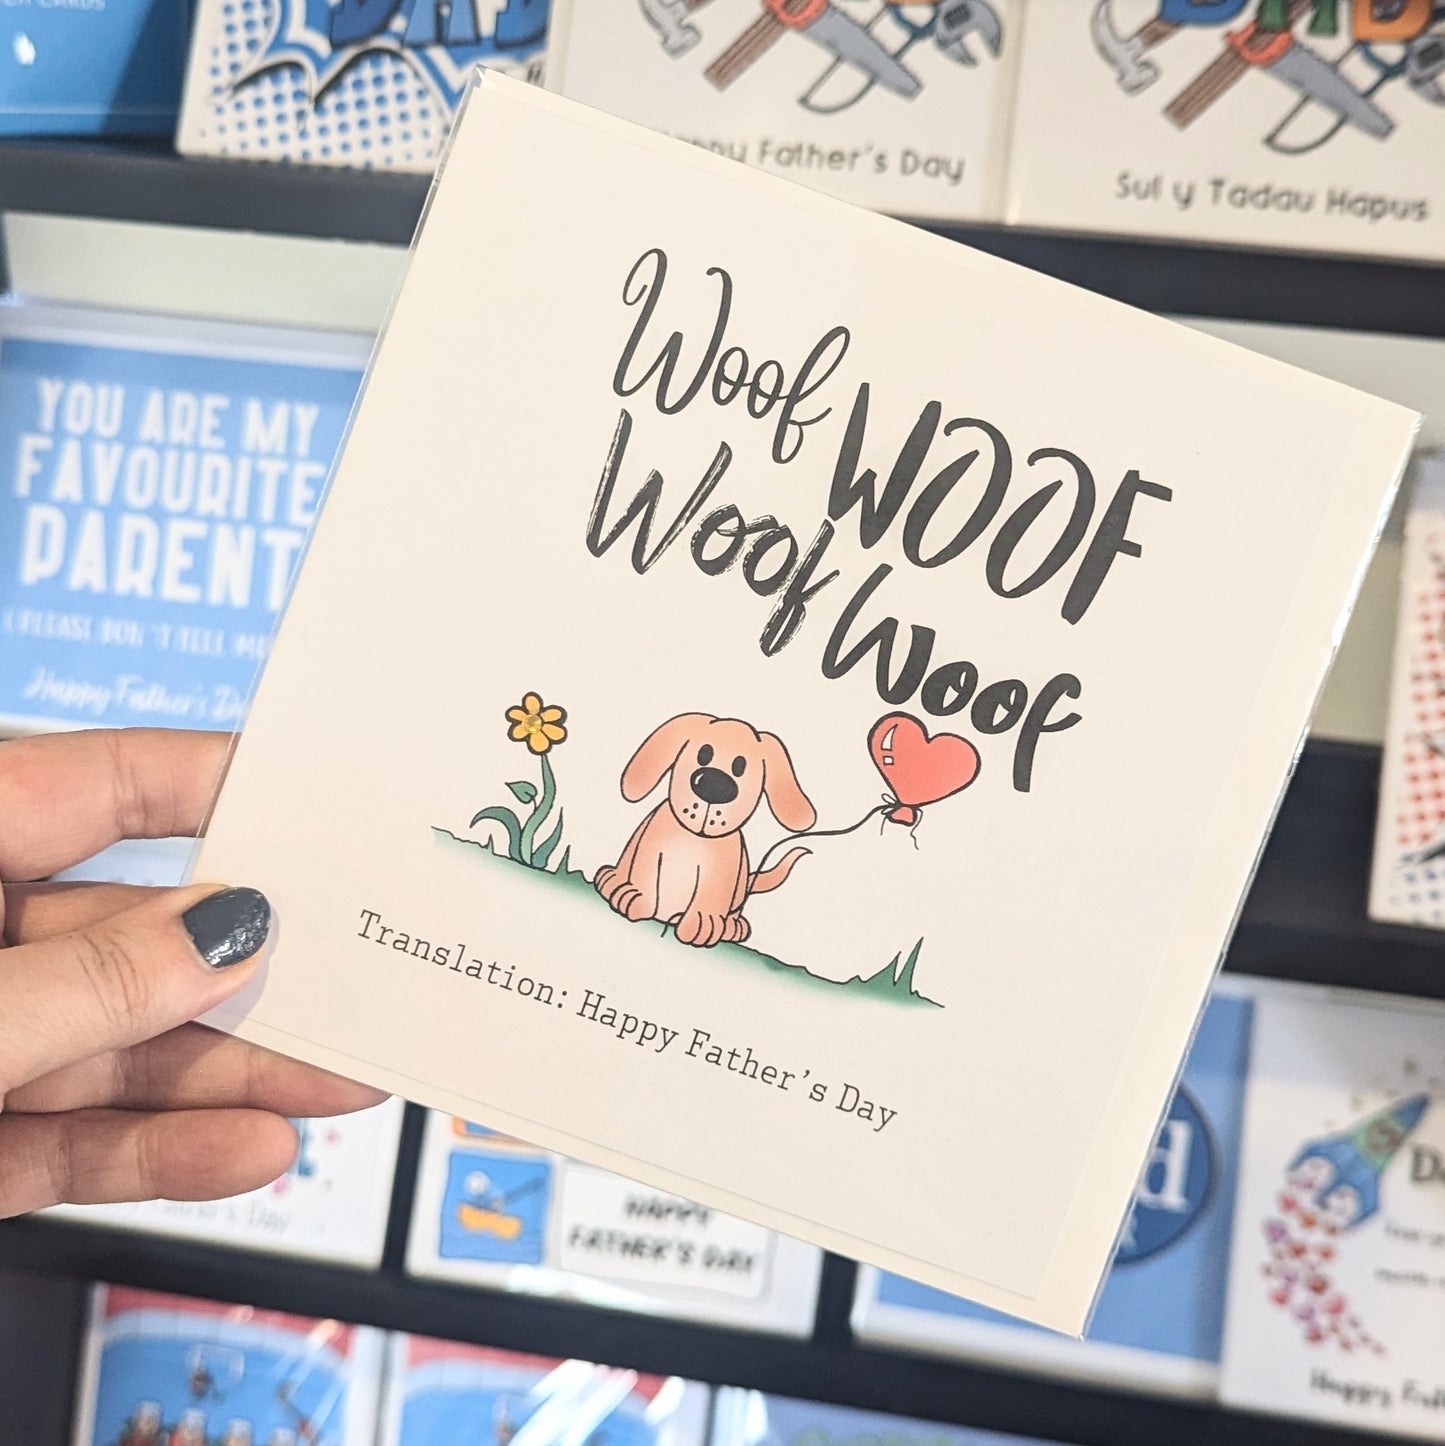 Woof woof Dog - Fathers Day Card